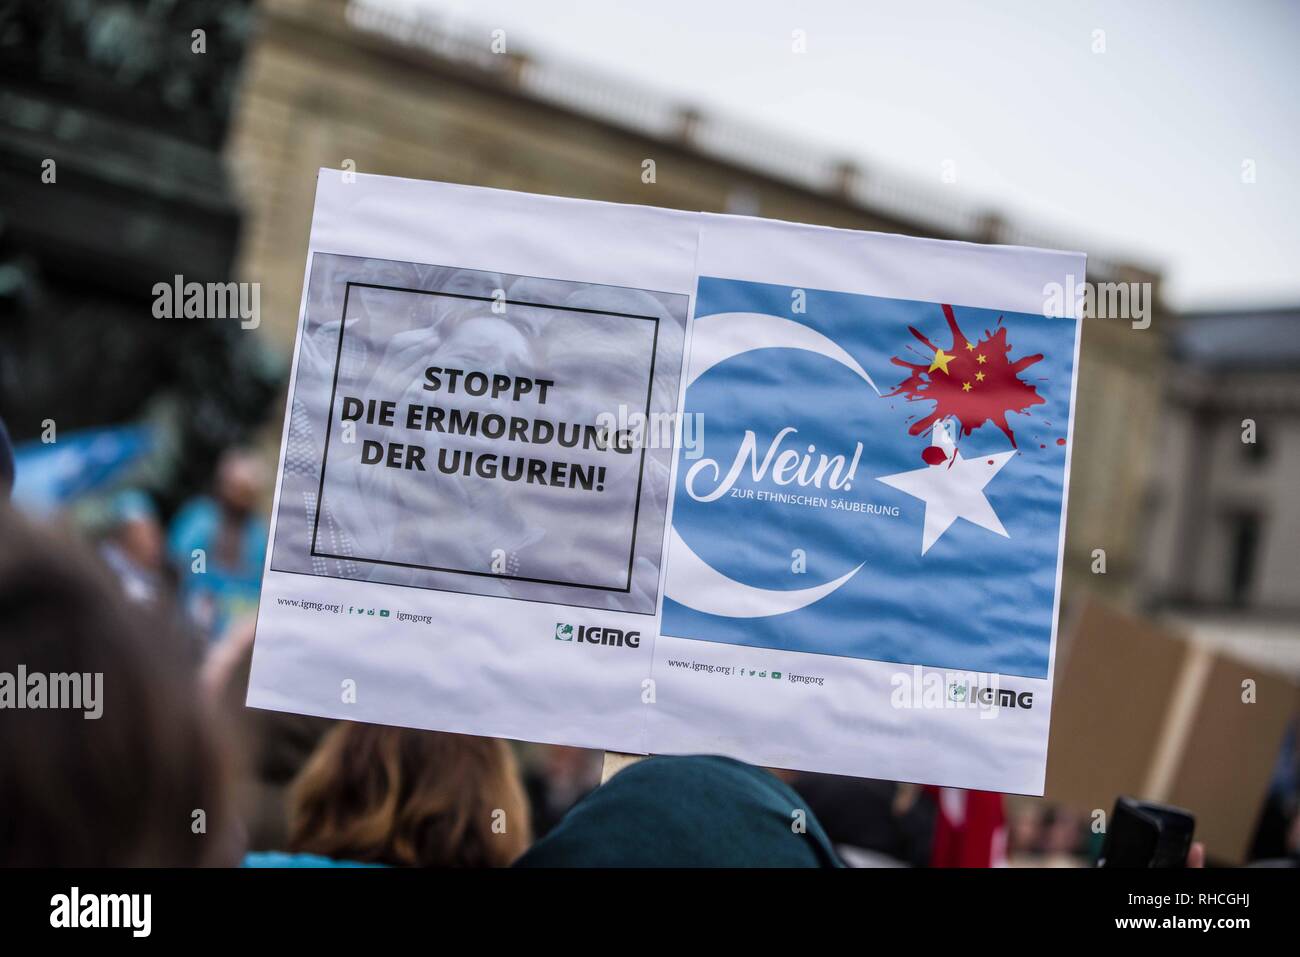 Munich, Bavaria, Germany. 2nd Feb, 2019. ''Stop the genocide of the Uyghurs''. to protest against the so-called 'Muslim Crackdown'' by the Chinese Communist Party in the Xinjiang Autonomous Region of China. The region is contains roughly 26 million people, 11 million of whom are the ethnically Turkic Uyghurs who still call the region East Turkistan . The CCP has placed upwards of 1 million Uyghurs in reeducation camps, as well as performing widespread surveillance of the non-Han residents. There are ma Credit: ZUM Credit: ZUMA Press, Inc./Alamy Live News Stock Photo